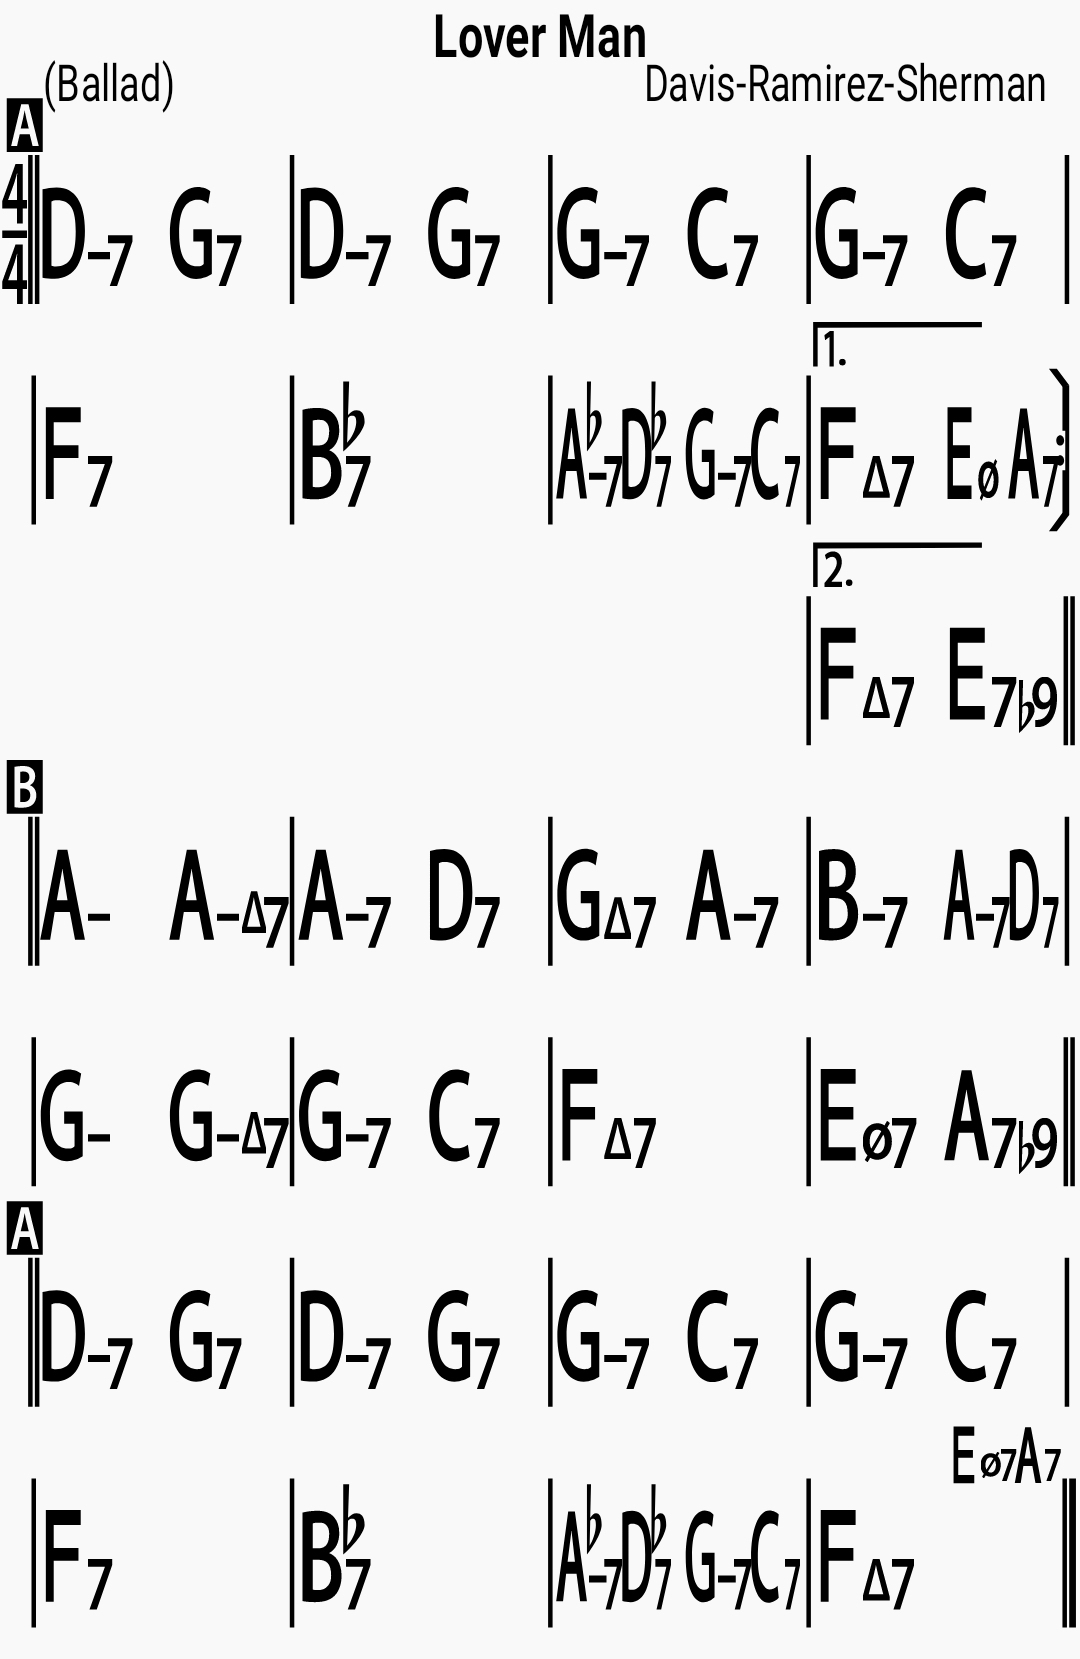 Chord chart for the jazz standard Lover Man